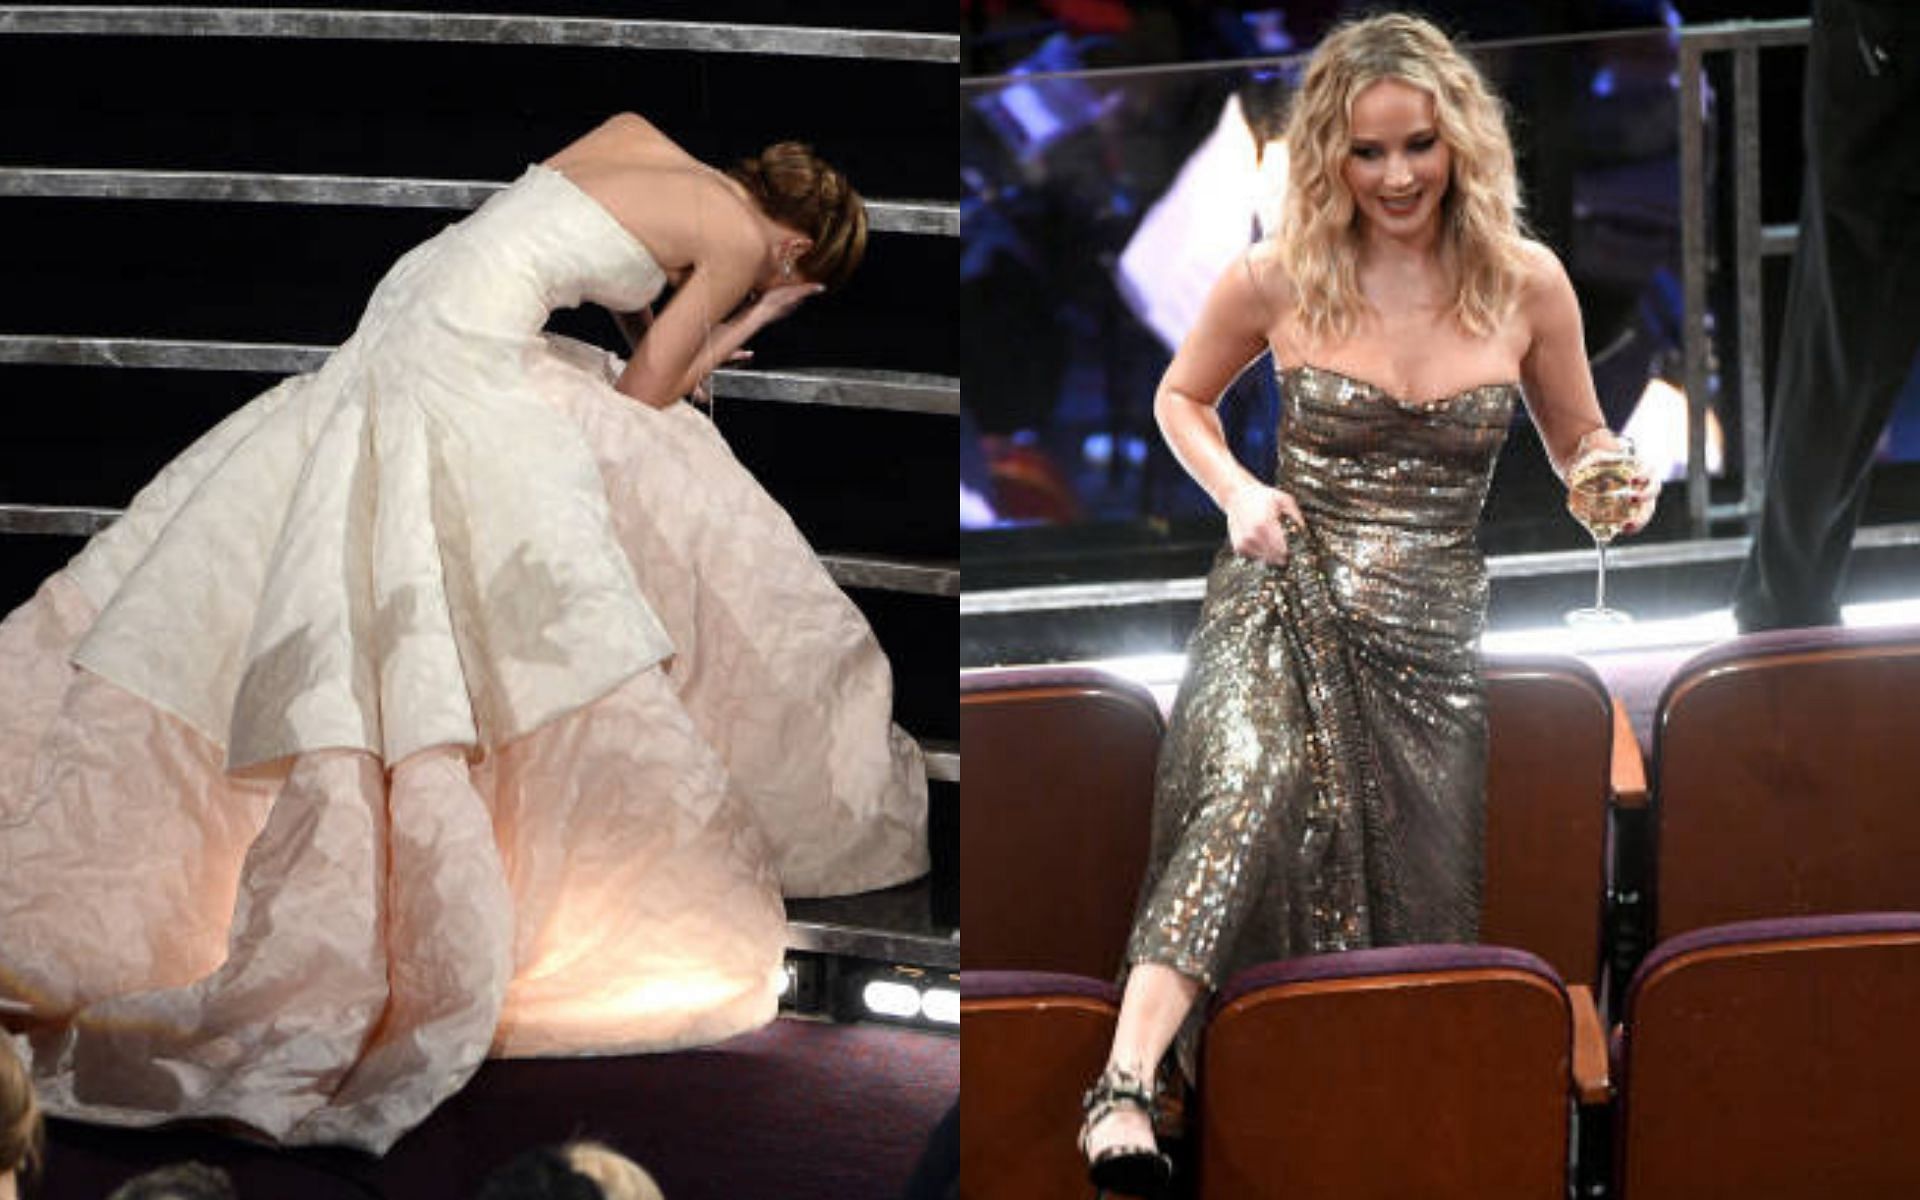 Jennifer Lawrence being clumsy at Oscars (Image via Getty Images)